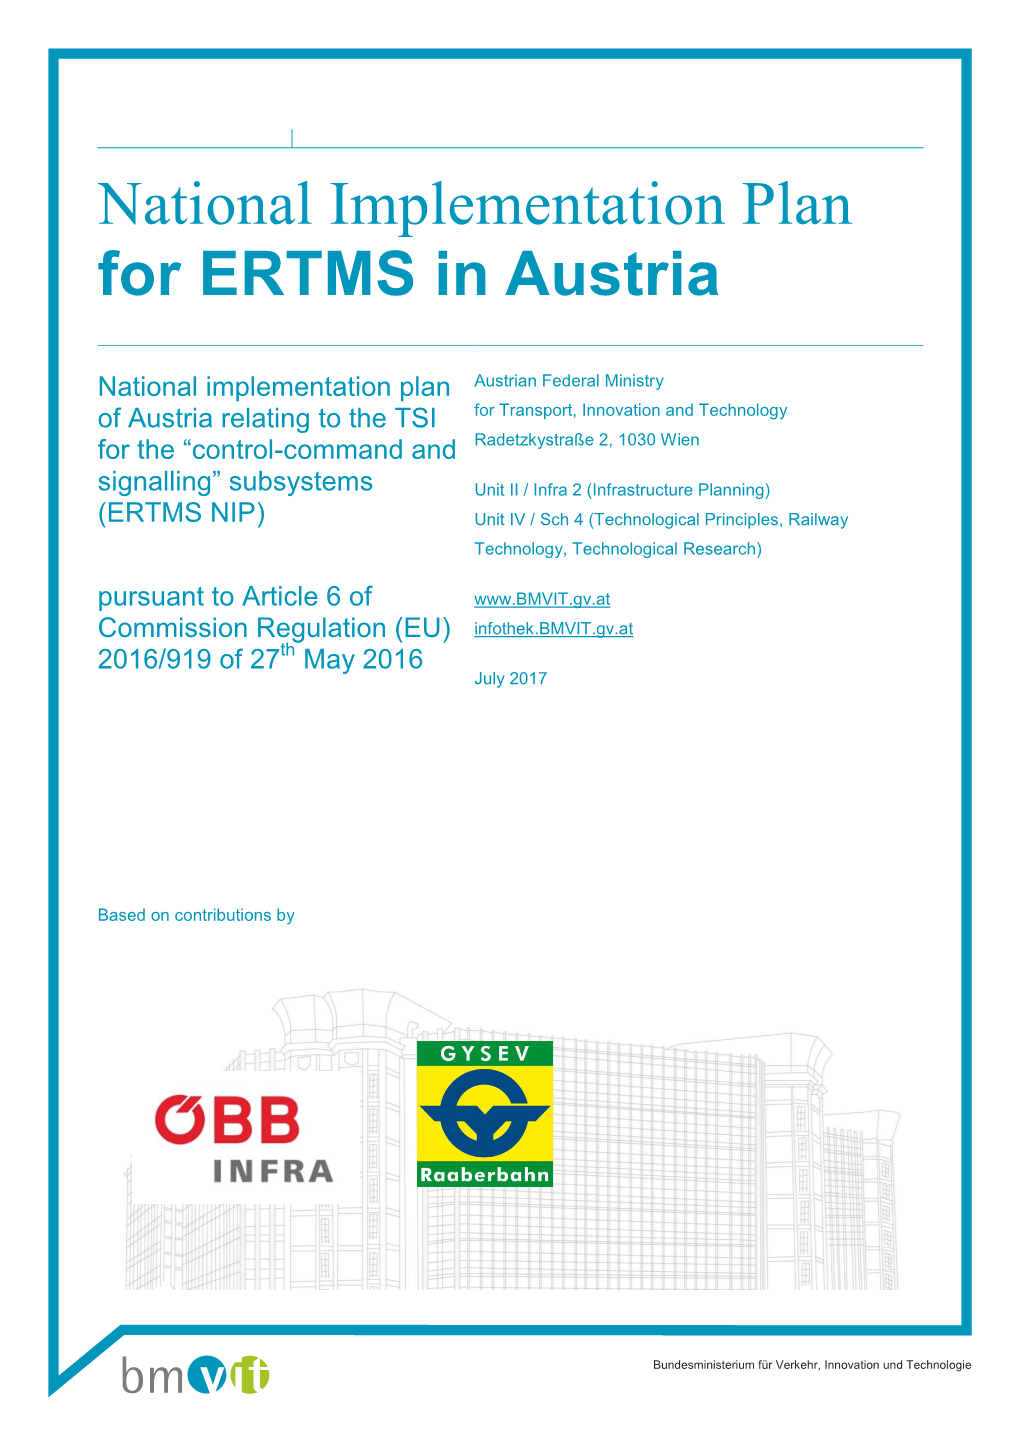 National Implementation Plan for ERTMS in Austria